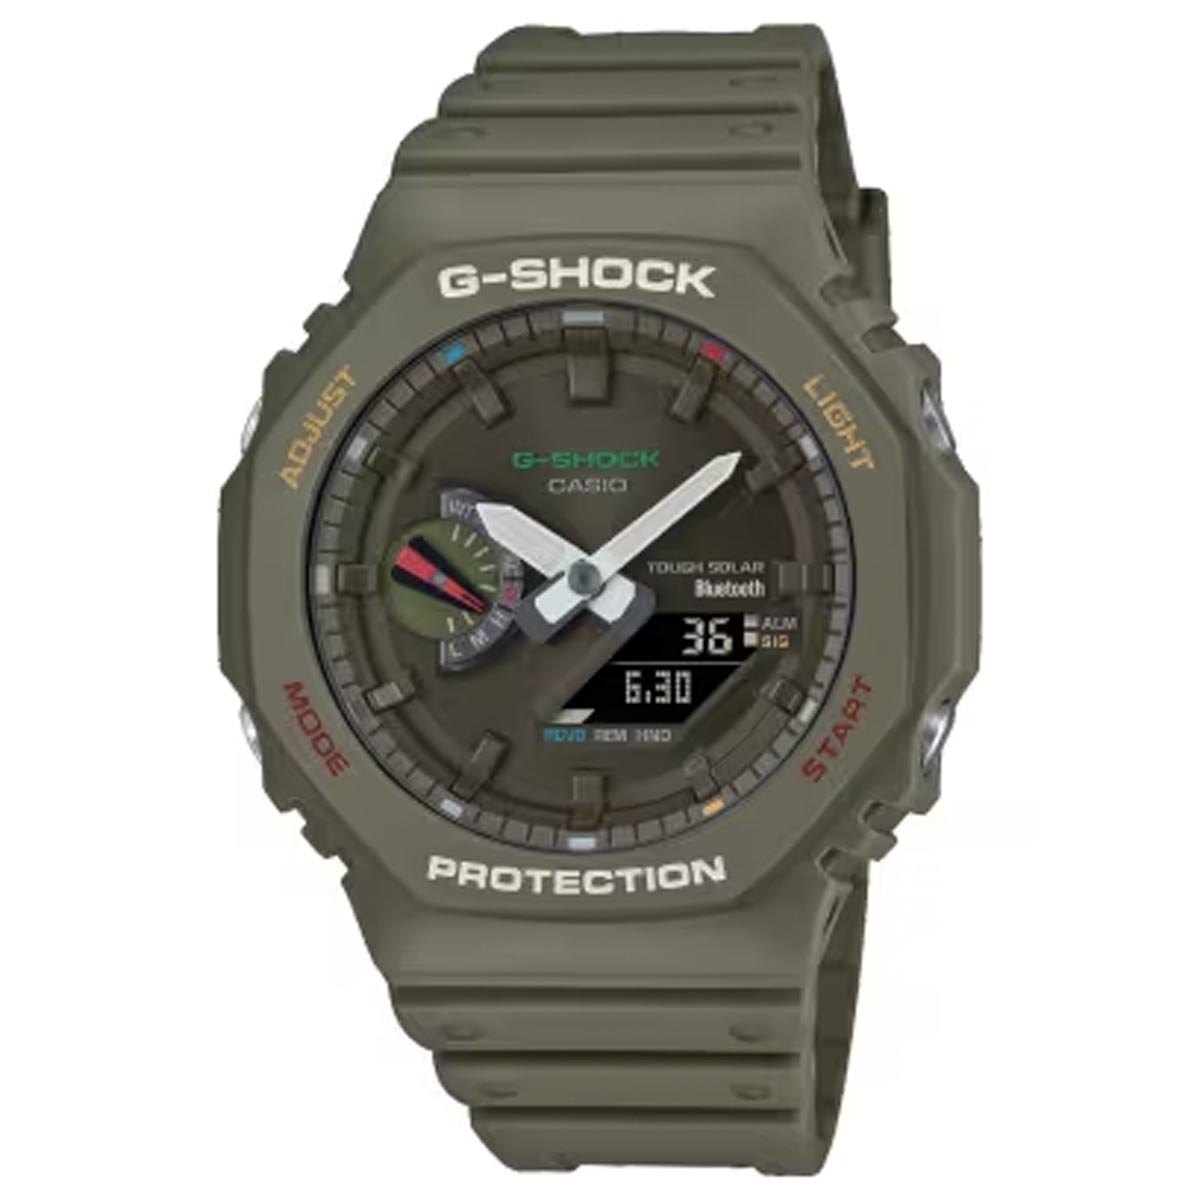 G Shock 2100 Series Mens Watch with Black Dial and Olive Strap (solar movement)